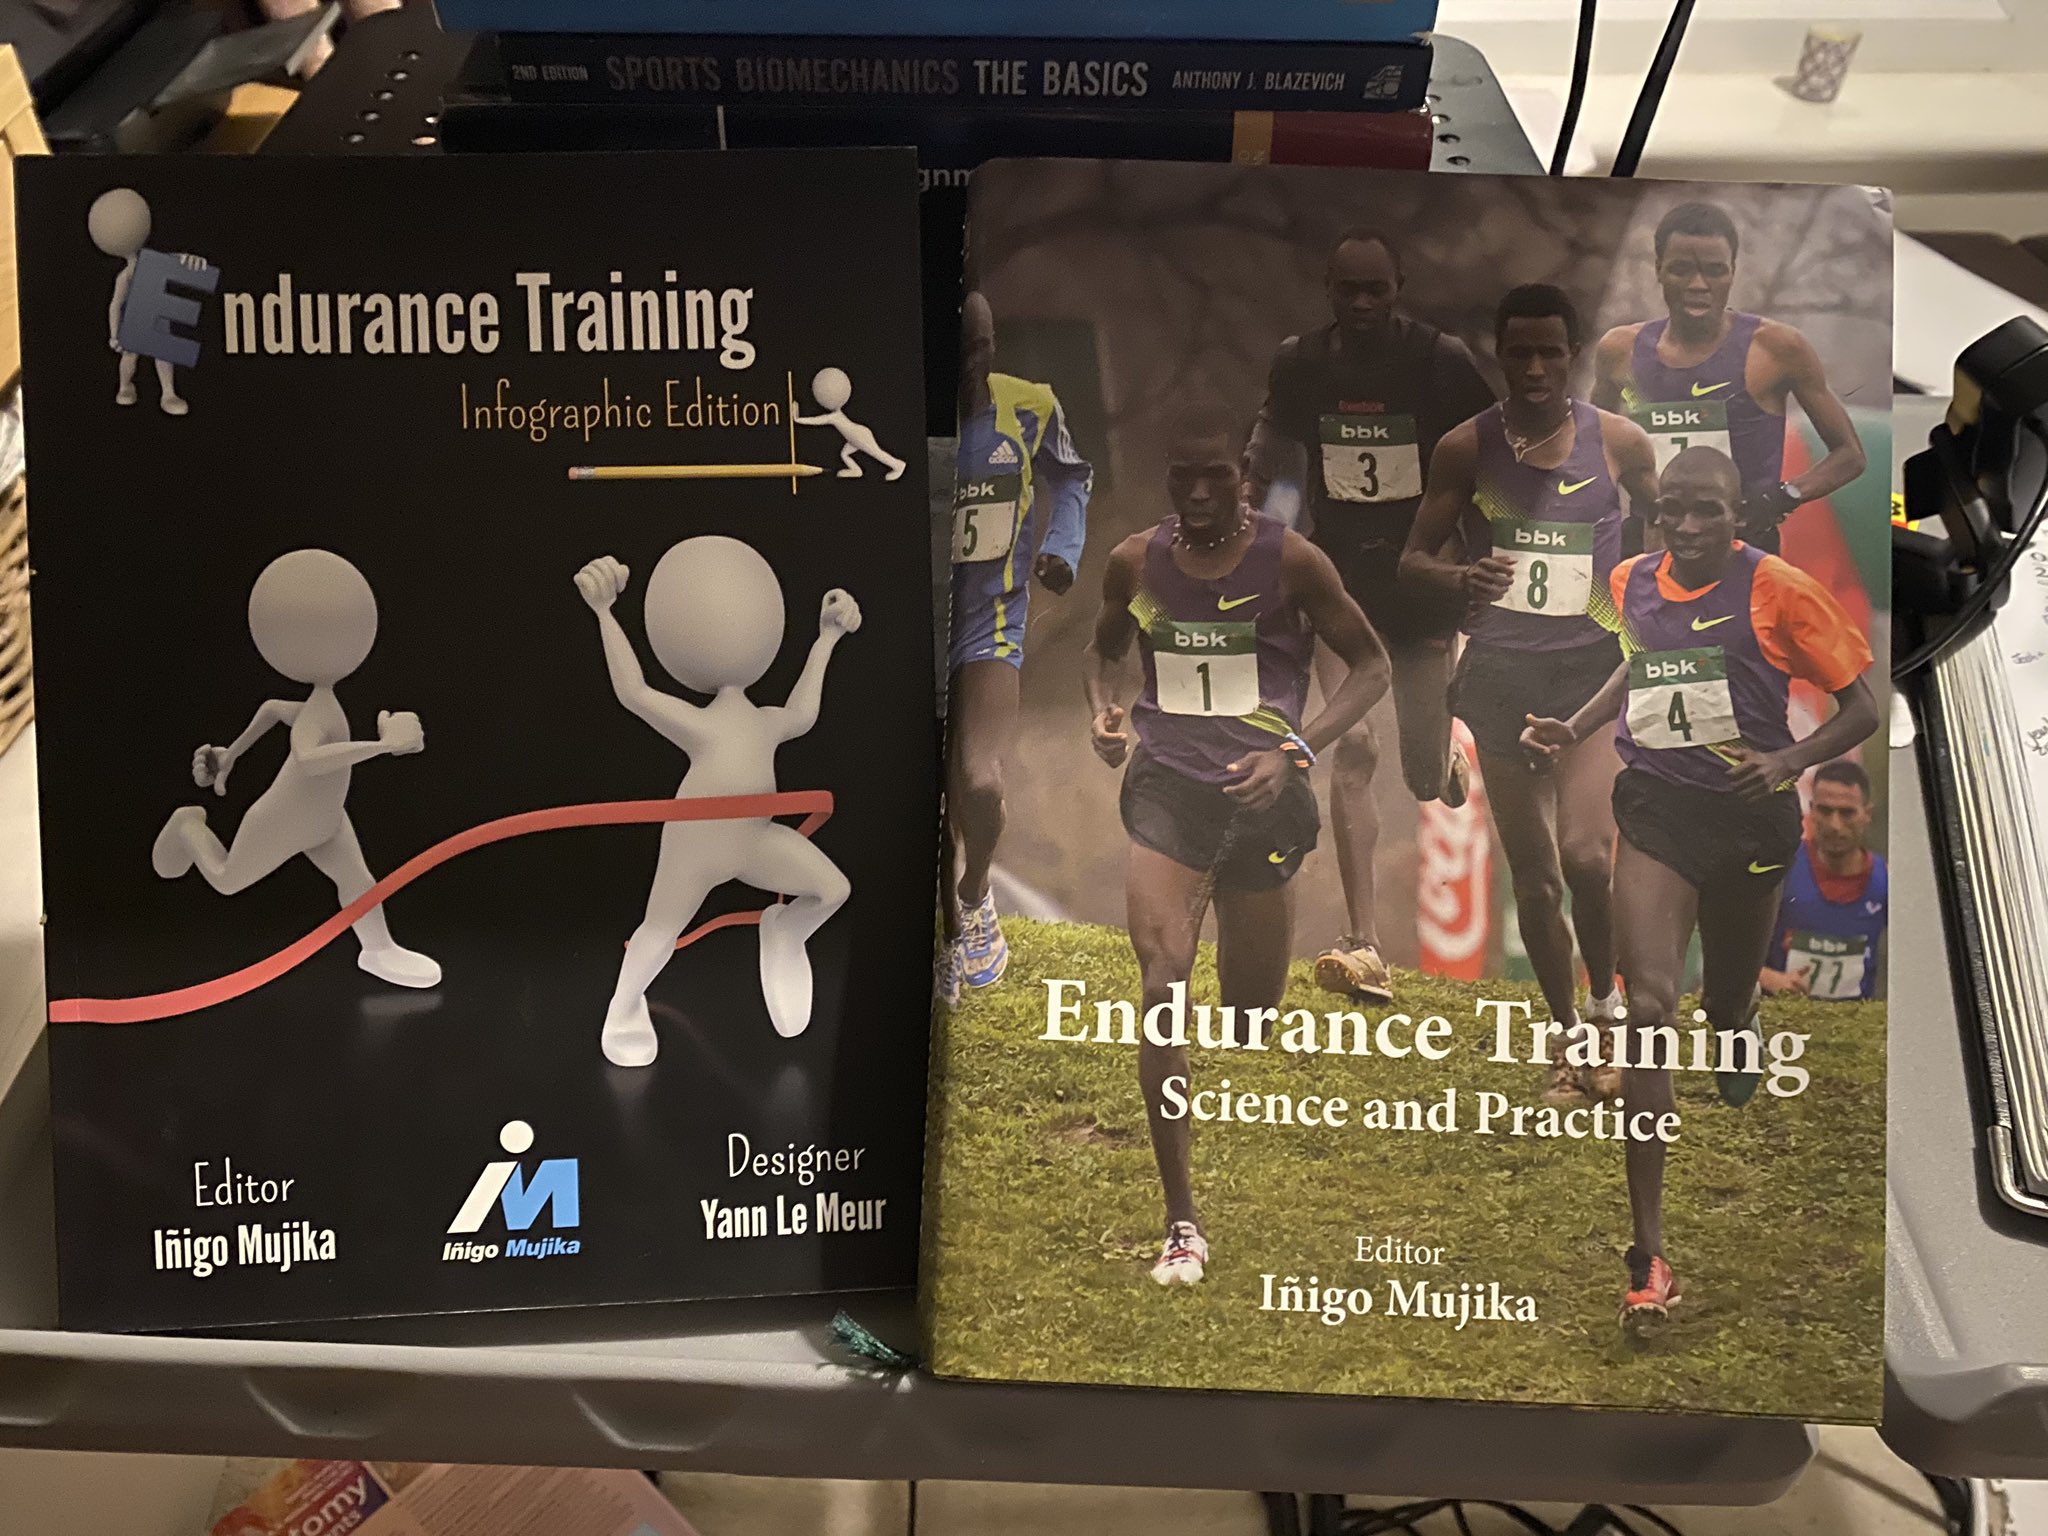 nødvendig omhyggelig ugentlig Inigo Mujika (En) on Twitter: "Interested in #endurance #training ? For  fully referenced scientific detail, choose left; for straight to the point  information, choose right. https://t.co/U5zngThAcp https://t.co/Ytd6qJ2nvI"  / Twitter